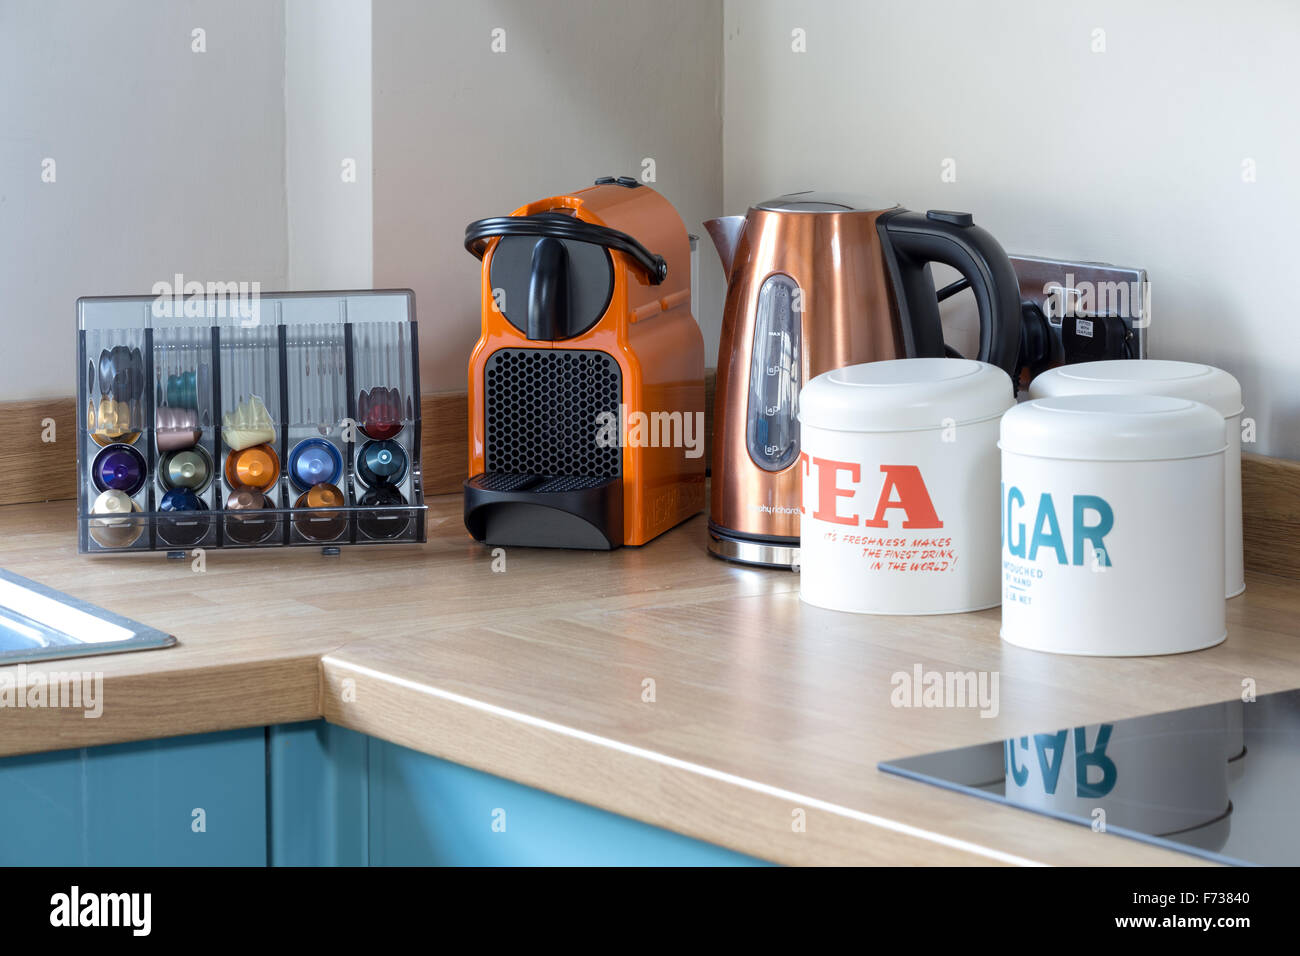 Contemporary kitchen surface with kettle and Nespresso coffee maker Stock Photo